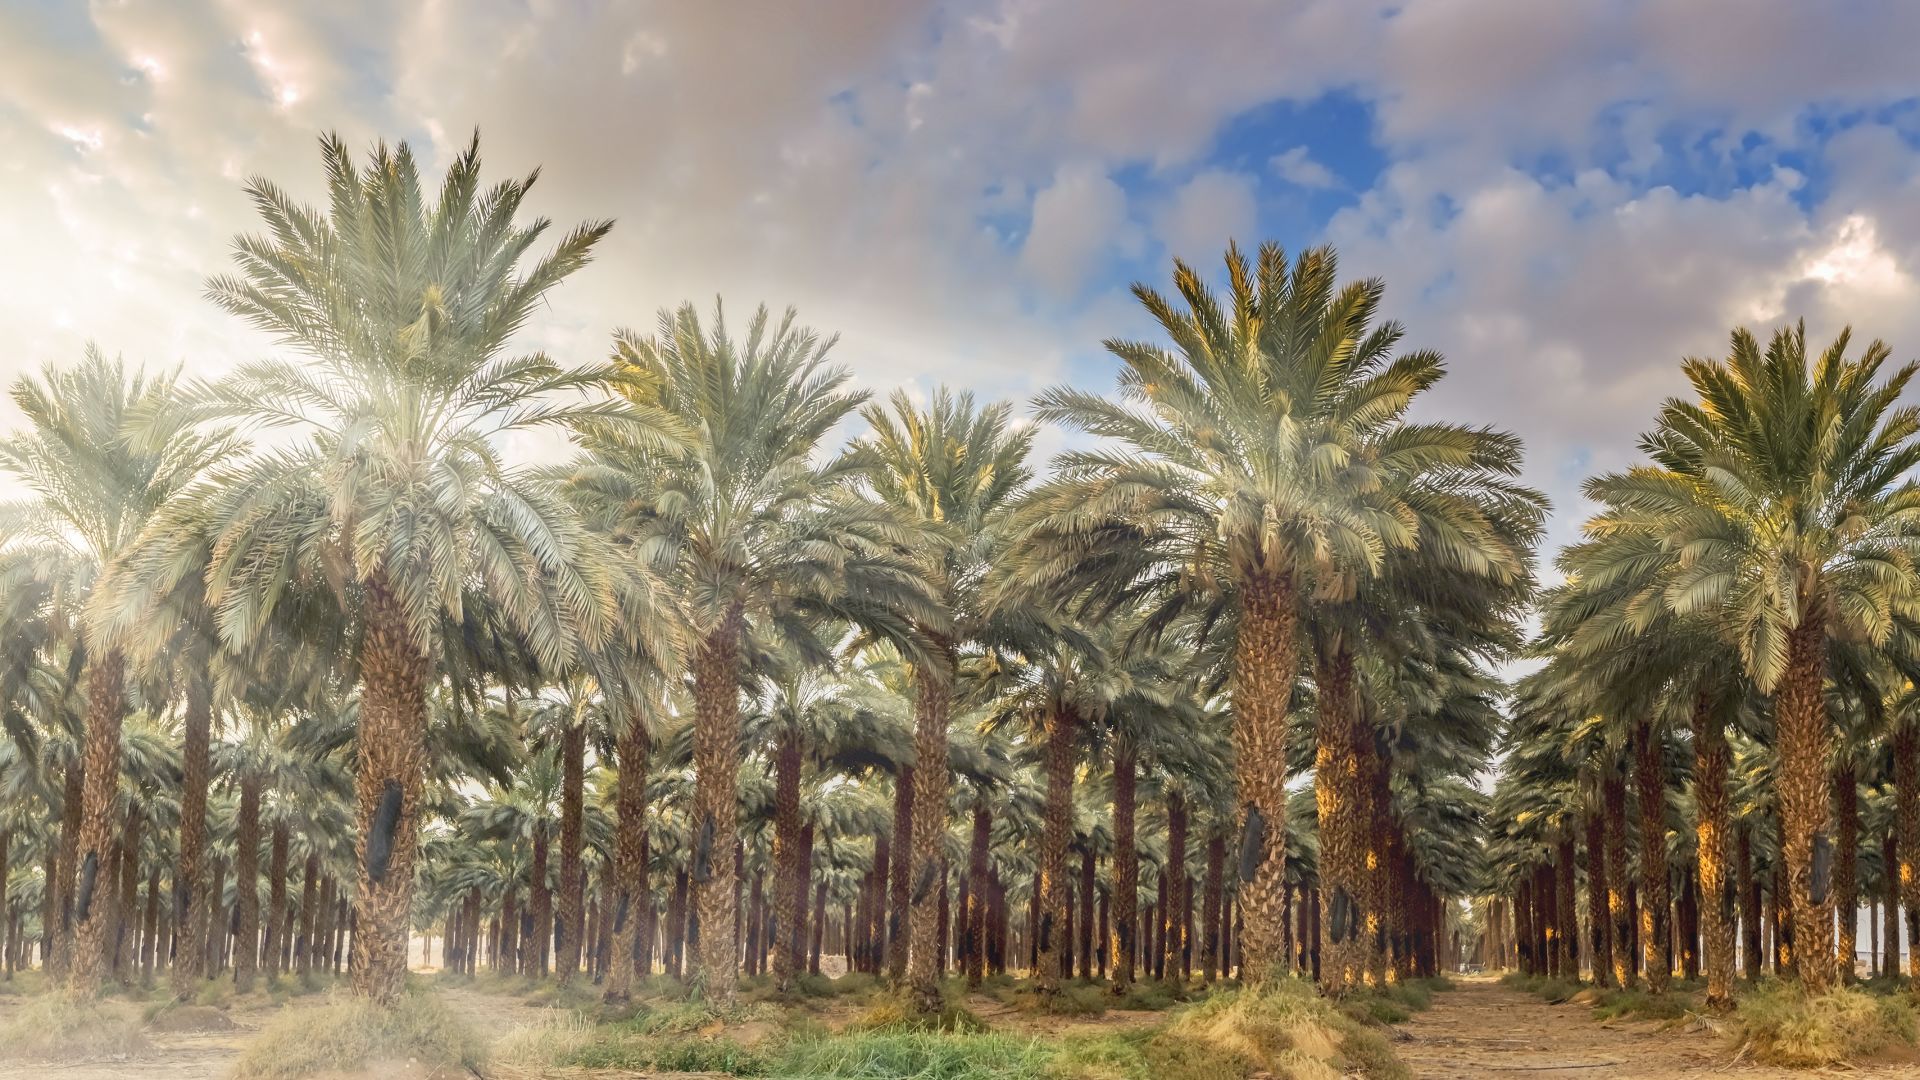 A Group Of Date Palm Trees